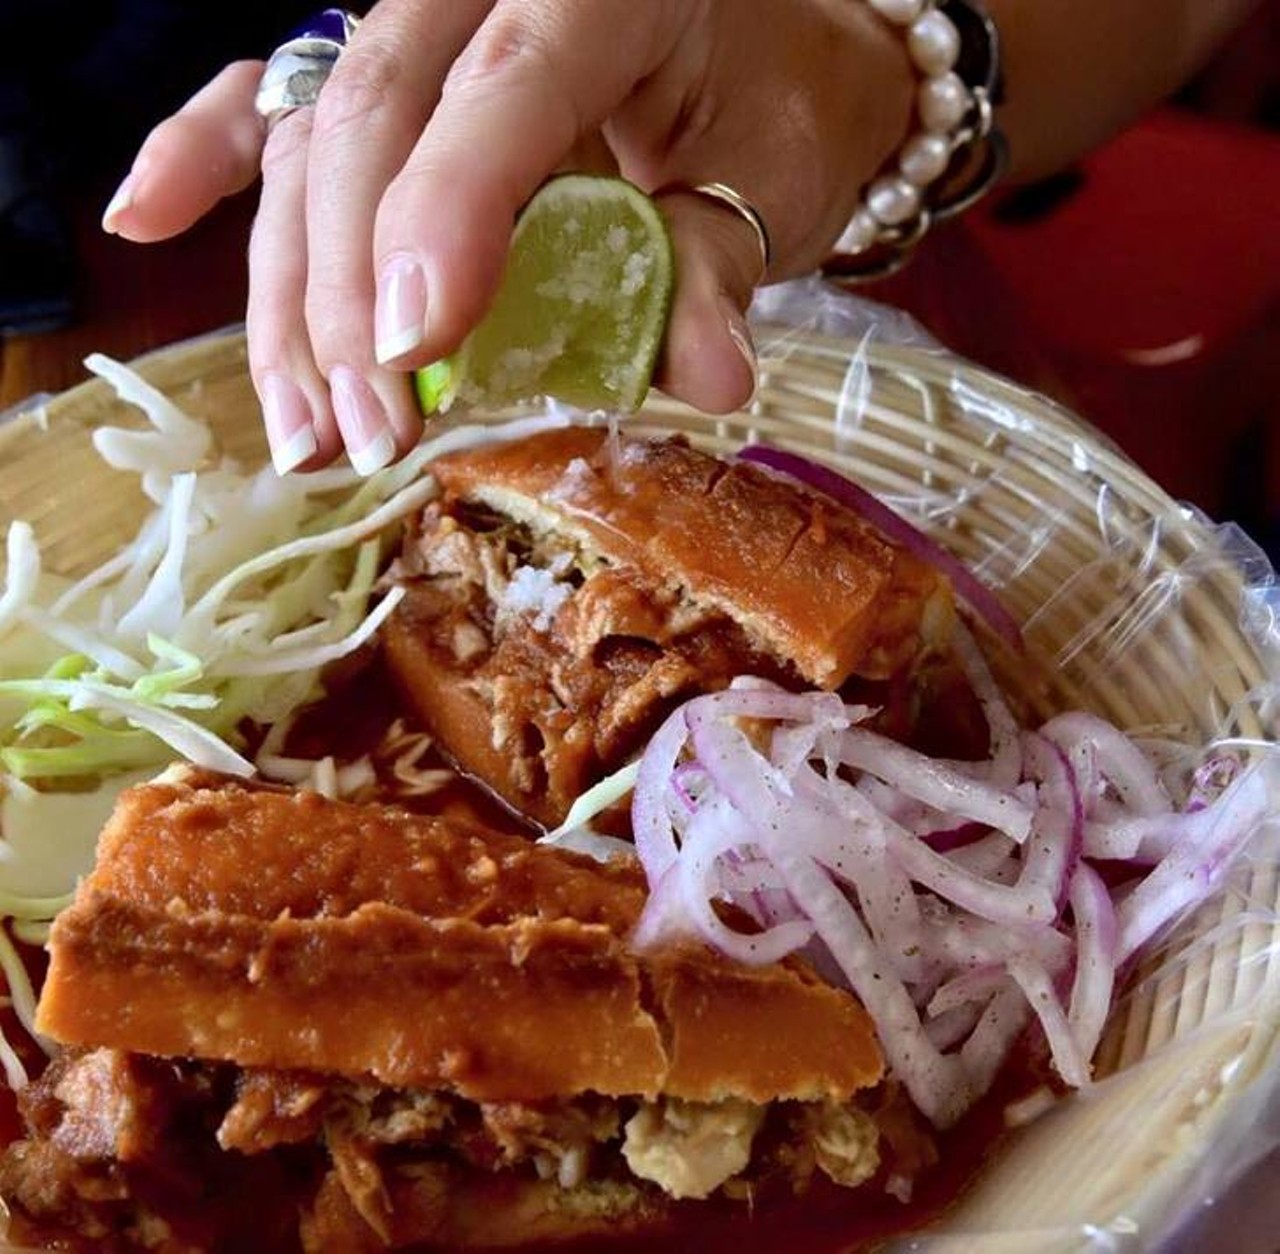 RO-HO Pork & Bread
If you're not getting down and dirty with these torta ahogadas, you're not living. Chef Jorge Rojo makes just about every sandwich, taco dorado and chilaquil order that comes in. 
623 Urban Loop, (210) 800-3487  
Photo via Facebook (RO-HO Pork & Bread)